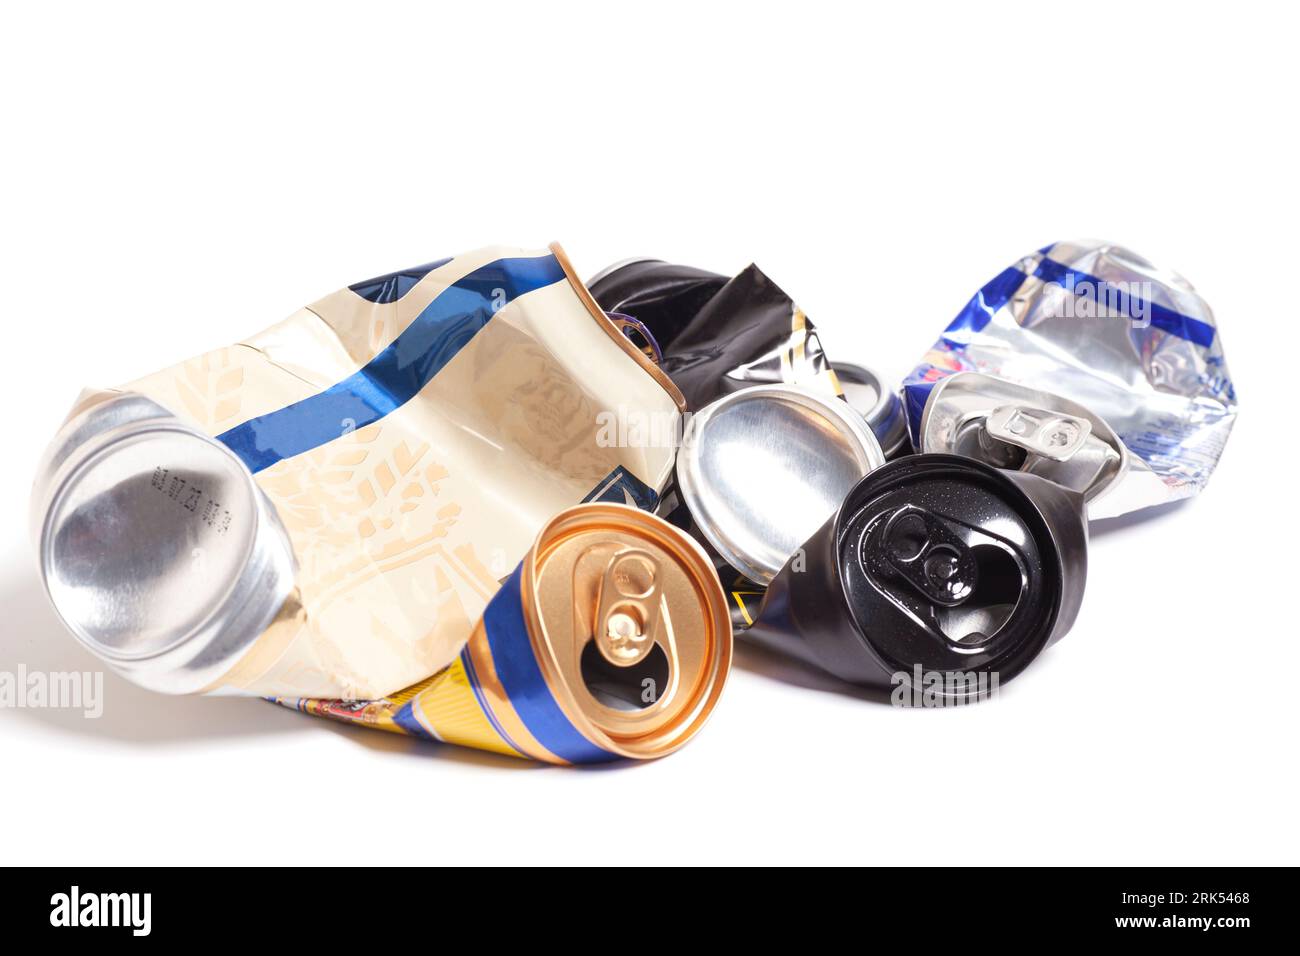 Empty crumpled cans from energy drink or beer. Stock Photo